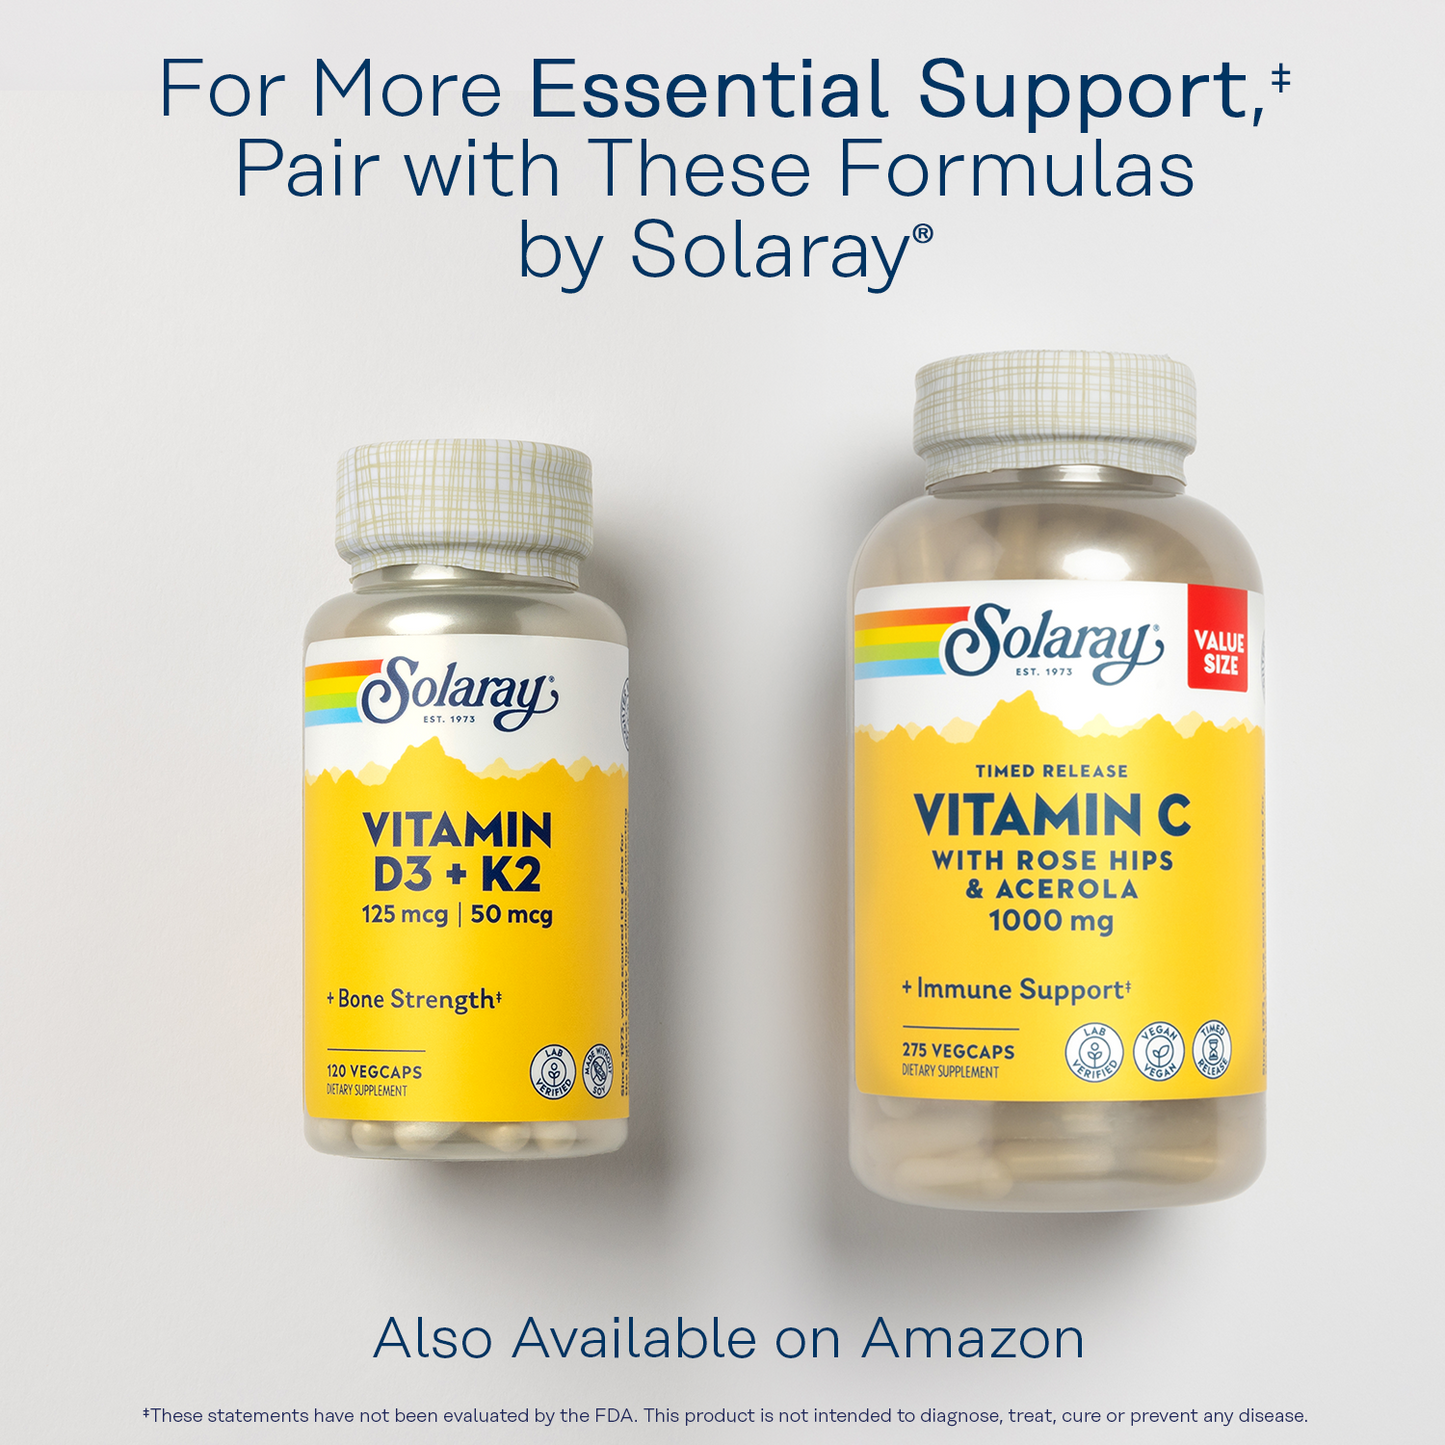 Solaray Magnesium Citrate 400mg - Bone Strength, Muscle Recovery, and Digestion Support - Herbal Base - Vegan, Lab Verified, 60-Day Money-Back Guarantee - 60 Servings, 180 VegCaps